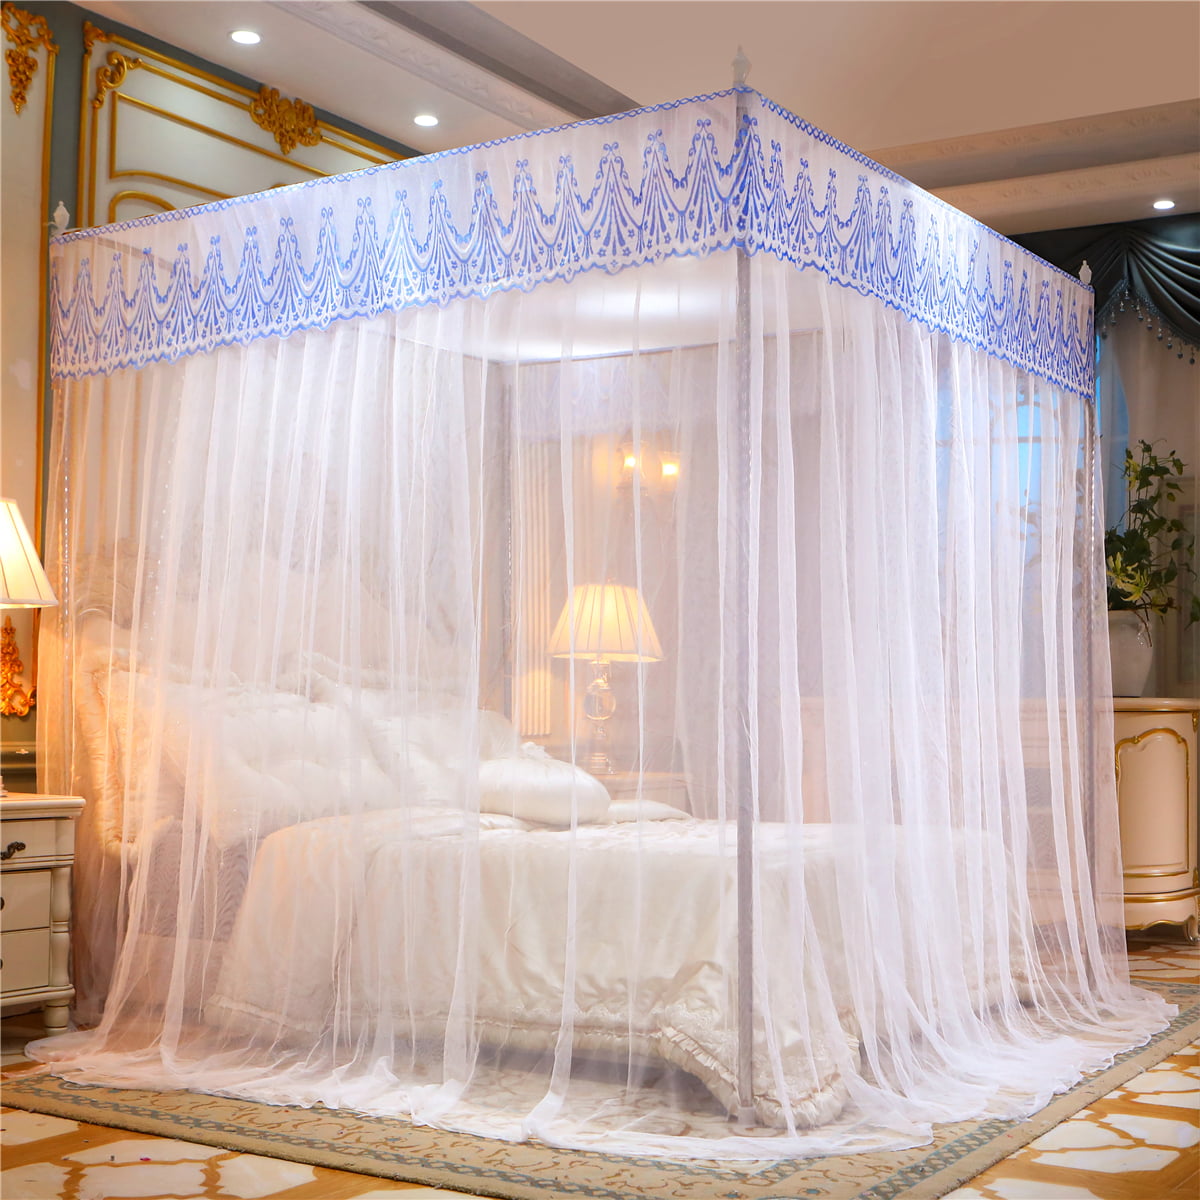 Four Corner Post Mosquito Net for Bed Canopy, Decorative Bed